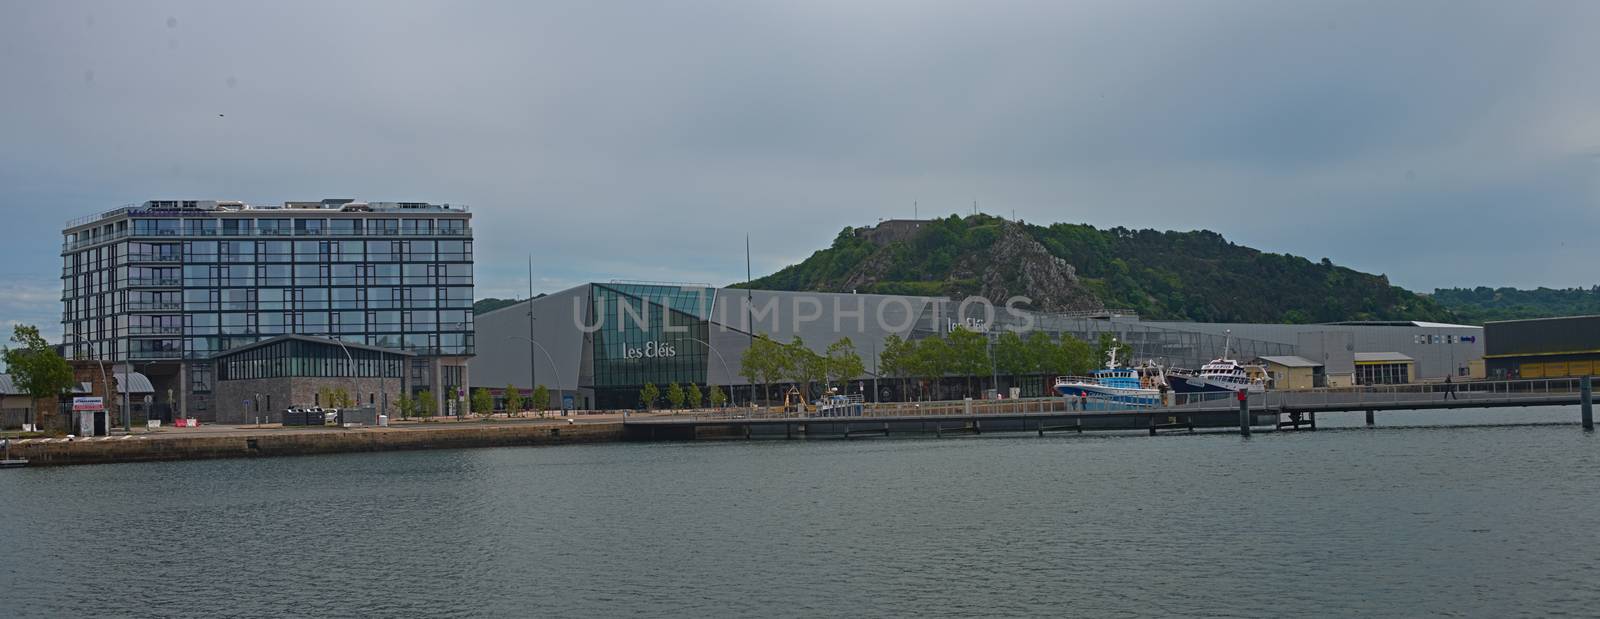 CHERBOURG, FRANCE - June 6th 2019 - Pier with dock and modern building at shore by sheriffkule